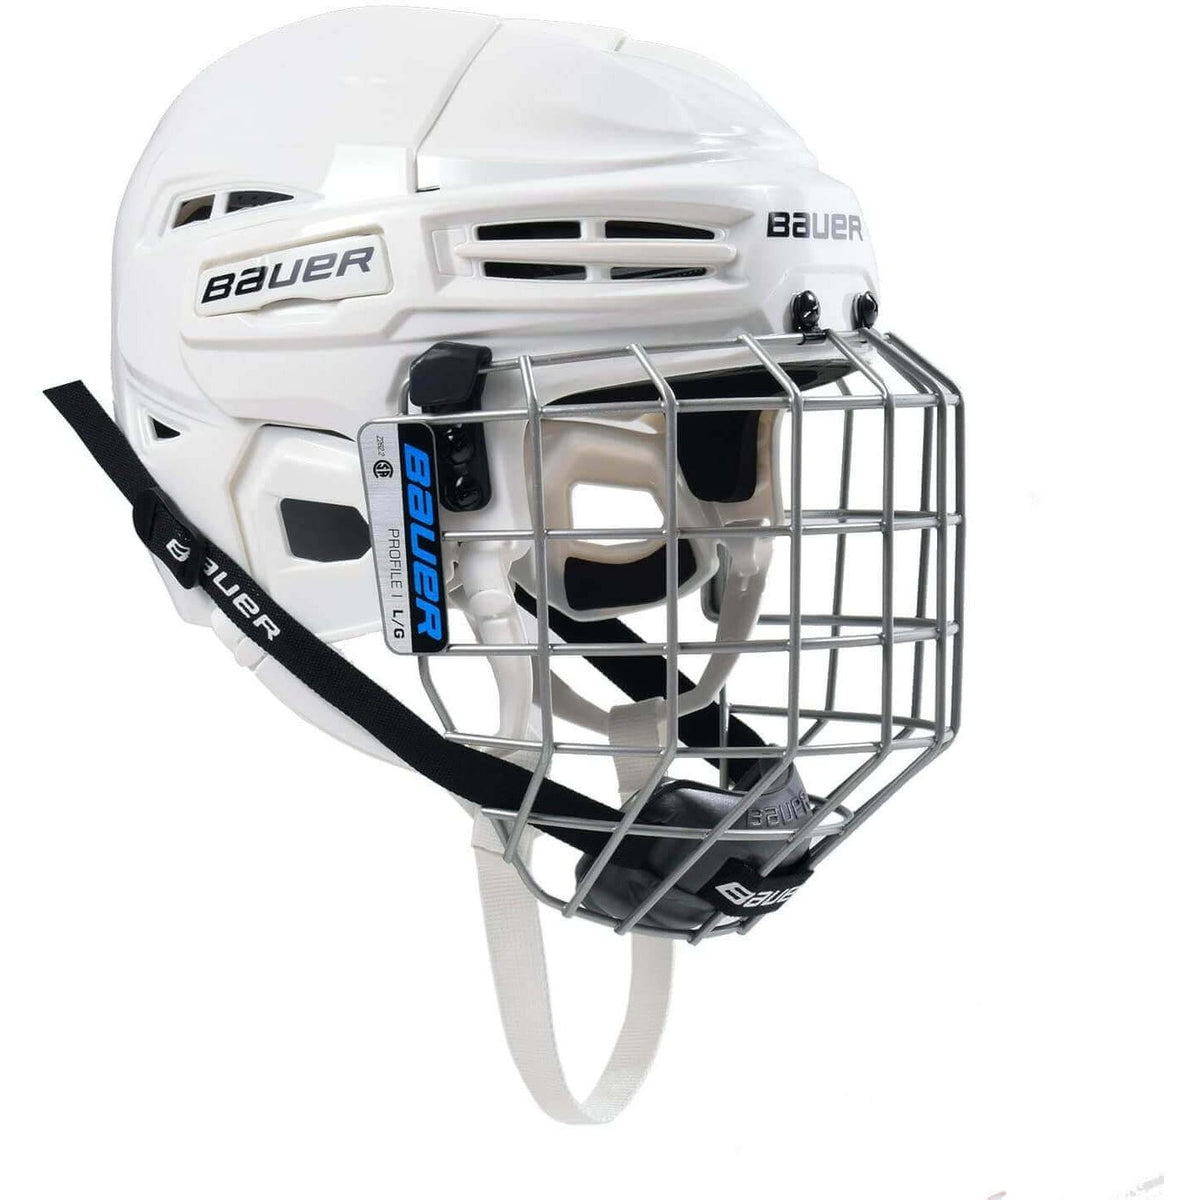 Bauer IMS 5.0 Hockey Helmet with Cage